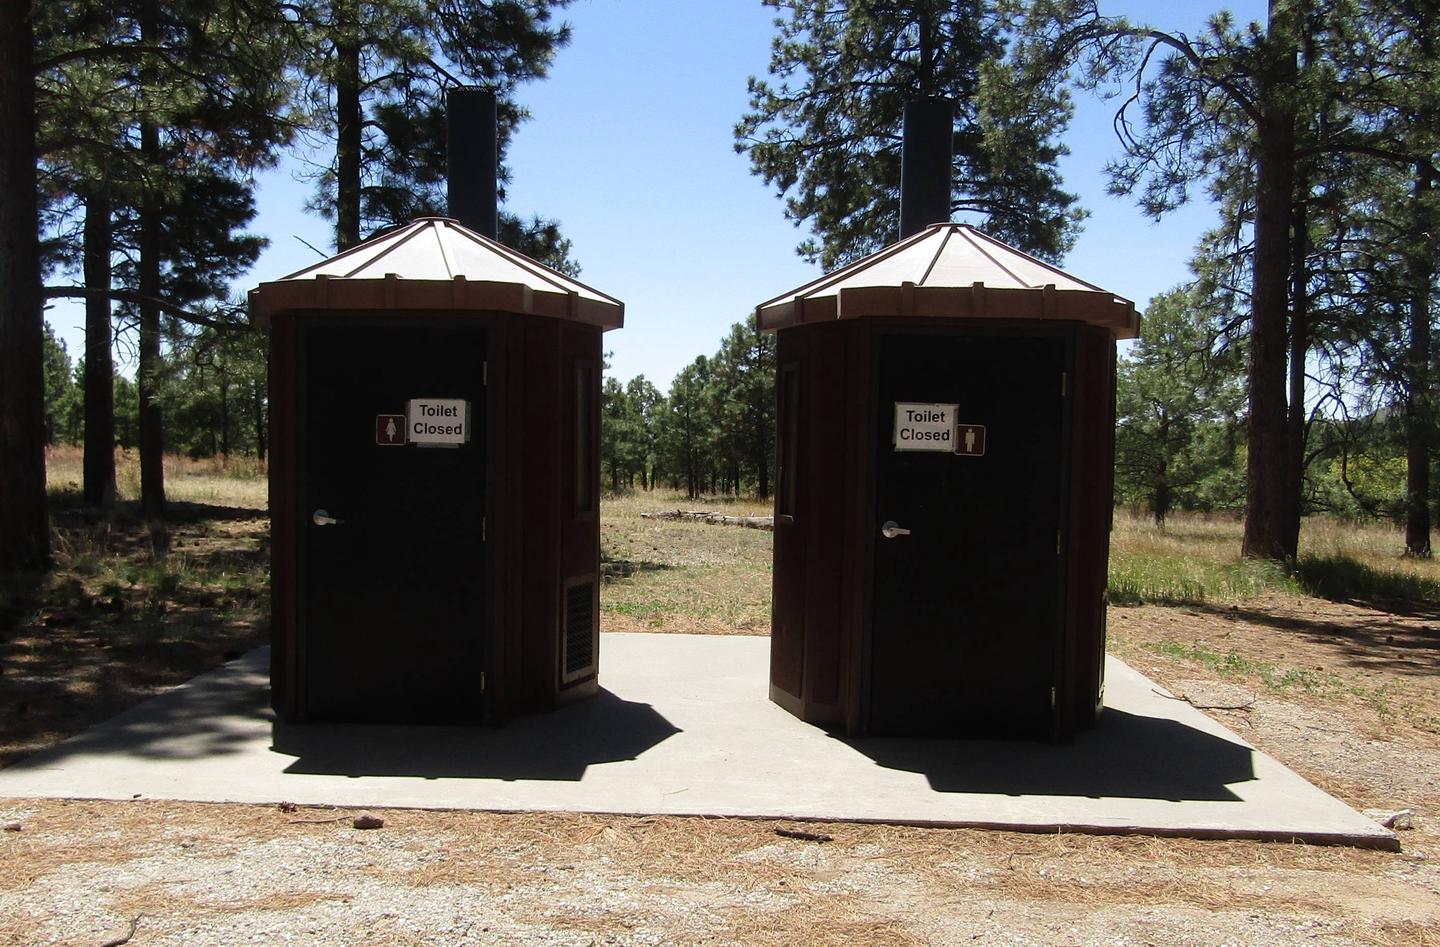 Two vault toilets surrounded by pine treesVault toilets are available in Ponderosa Group Campground. No running water is available in restrooms. No shower facilities in the park. 